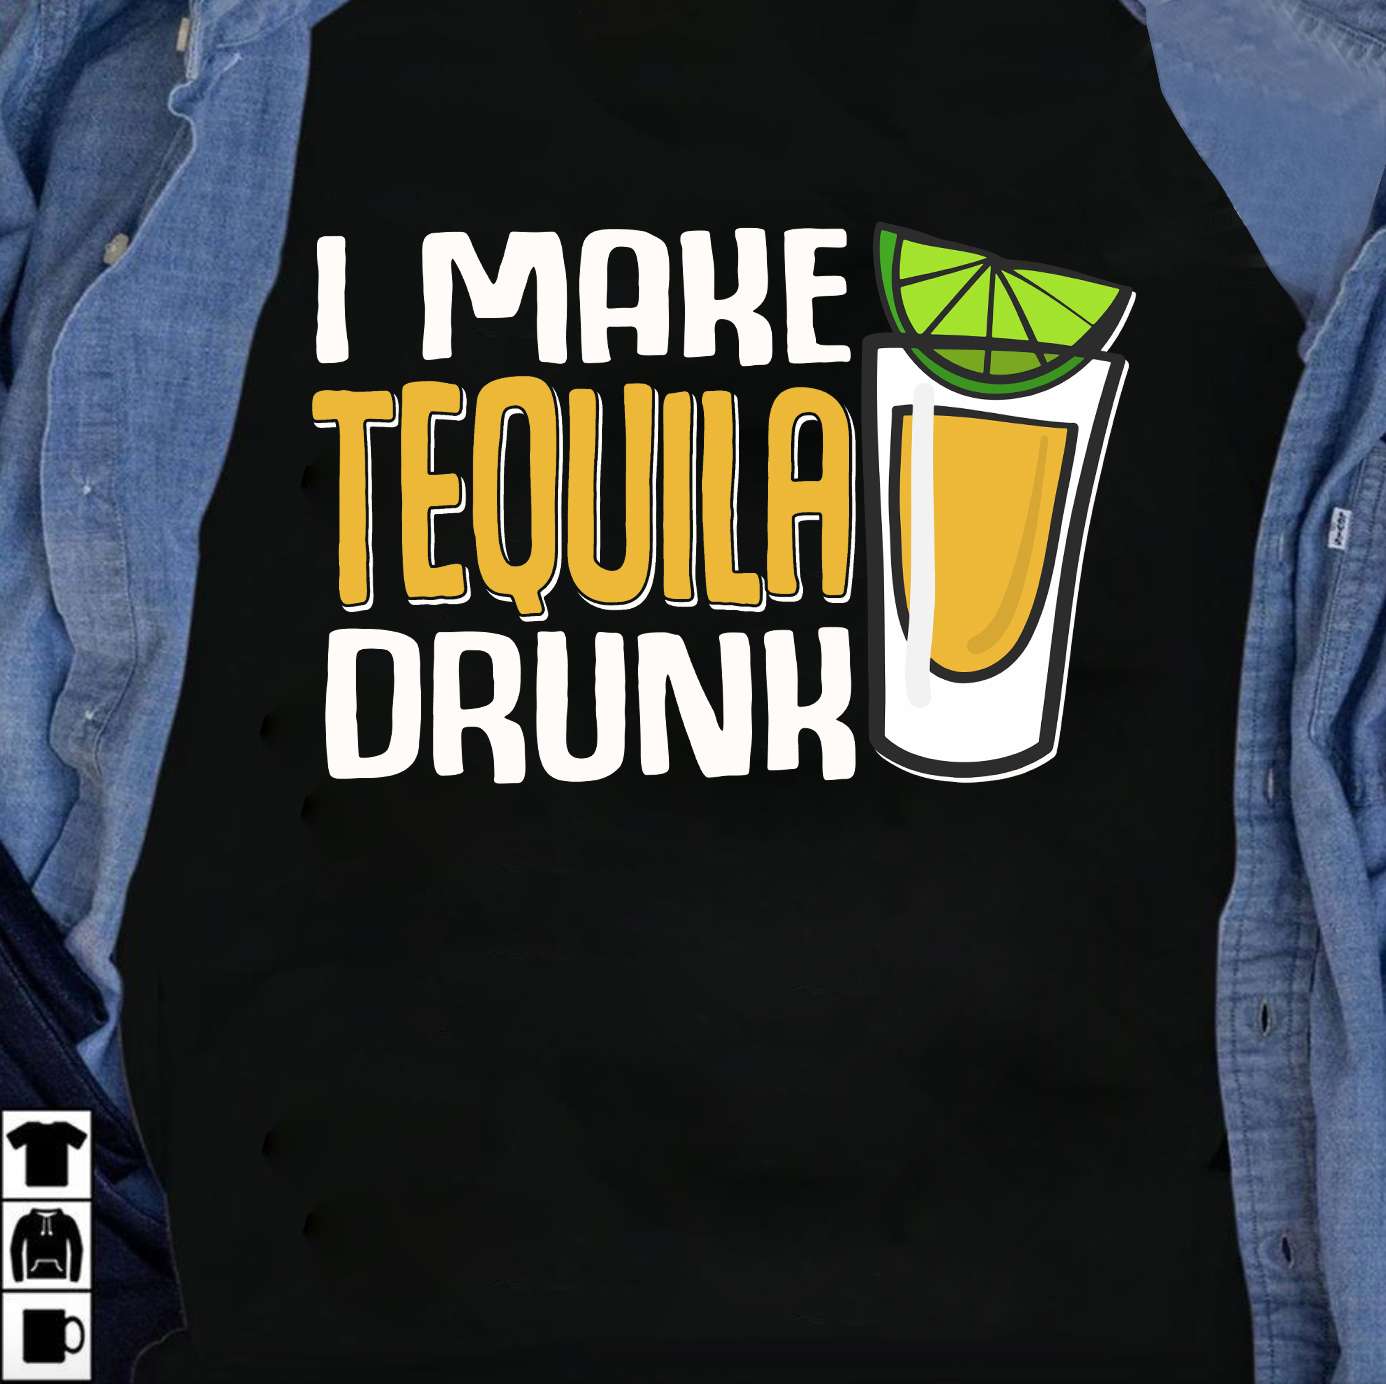 Tequila Whiskey - I make tequila drunk